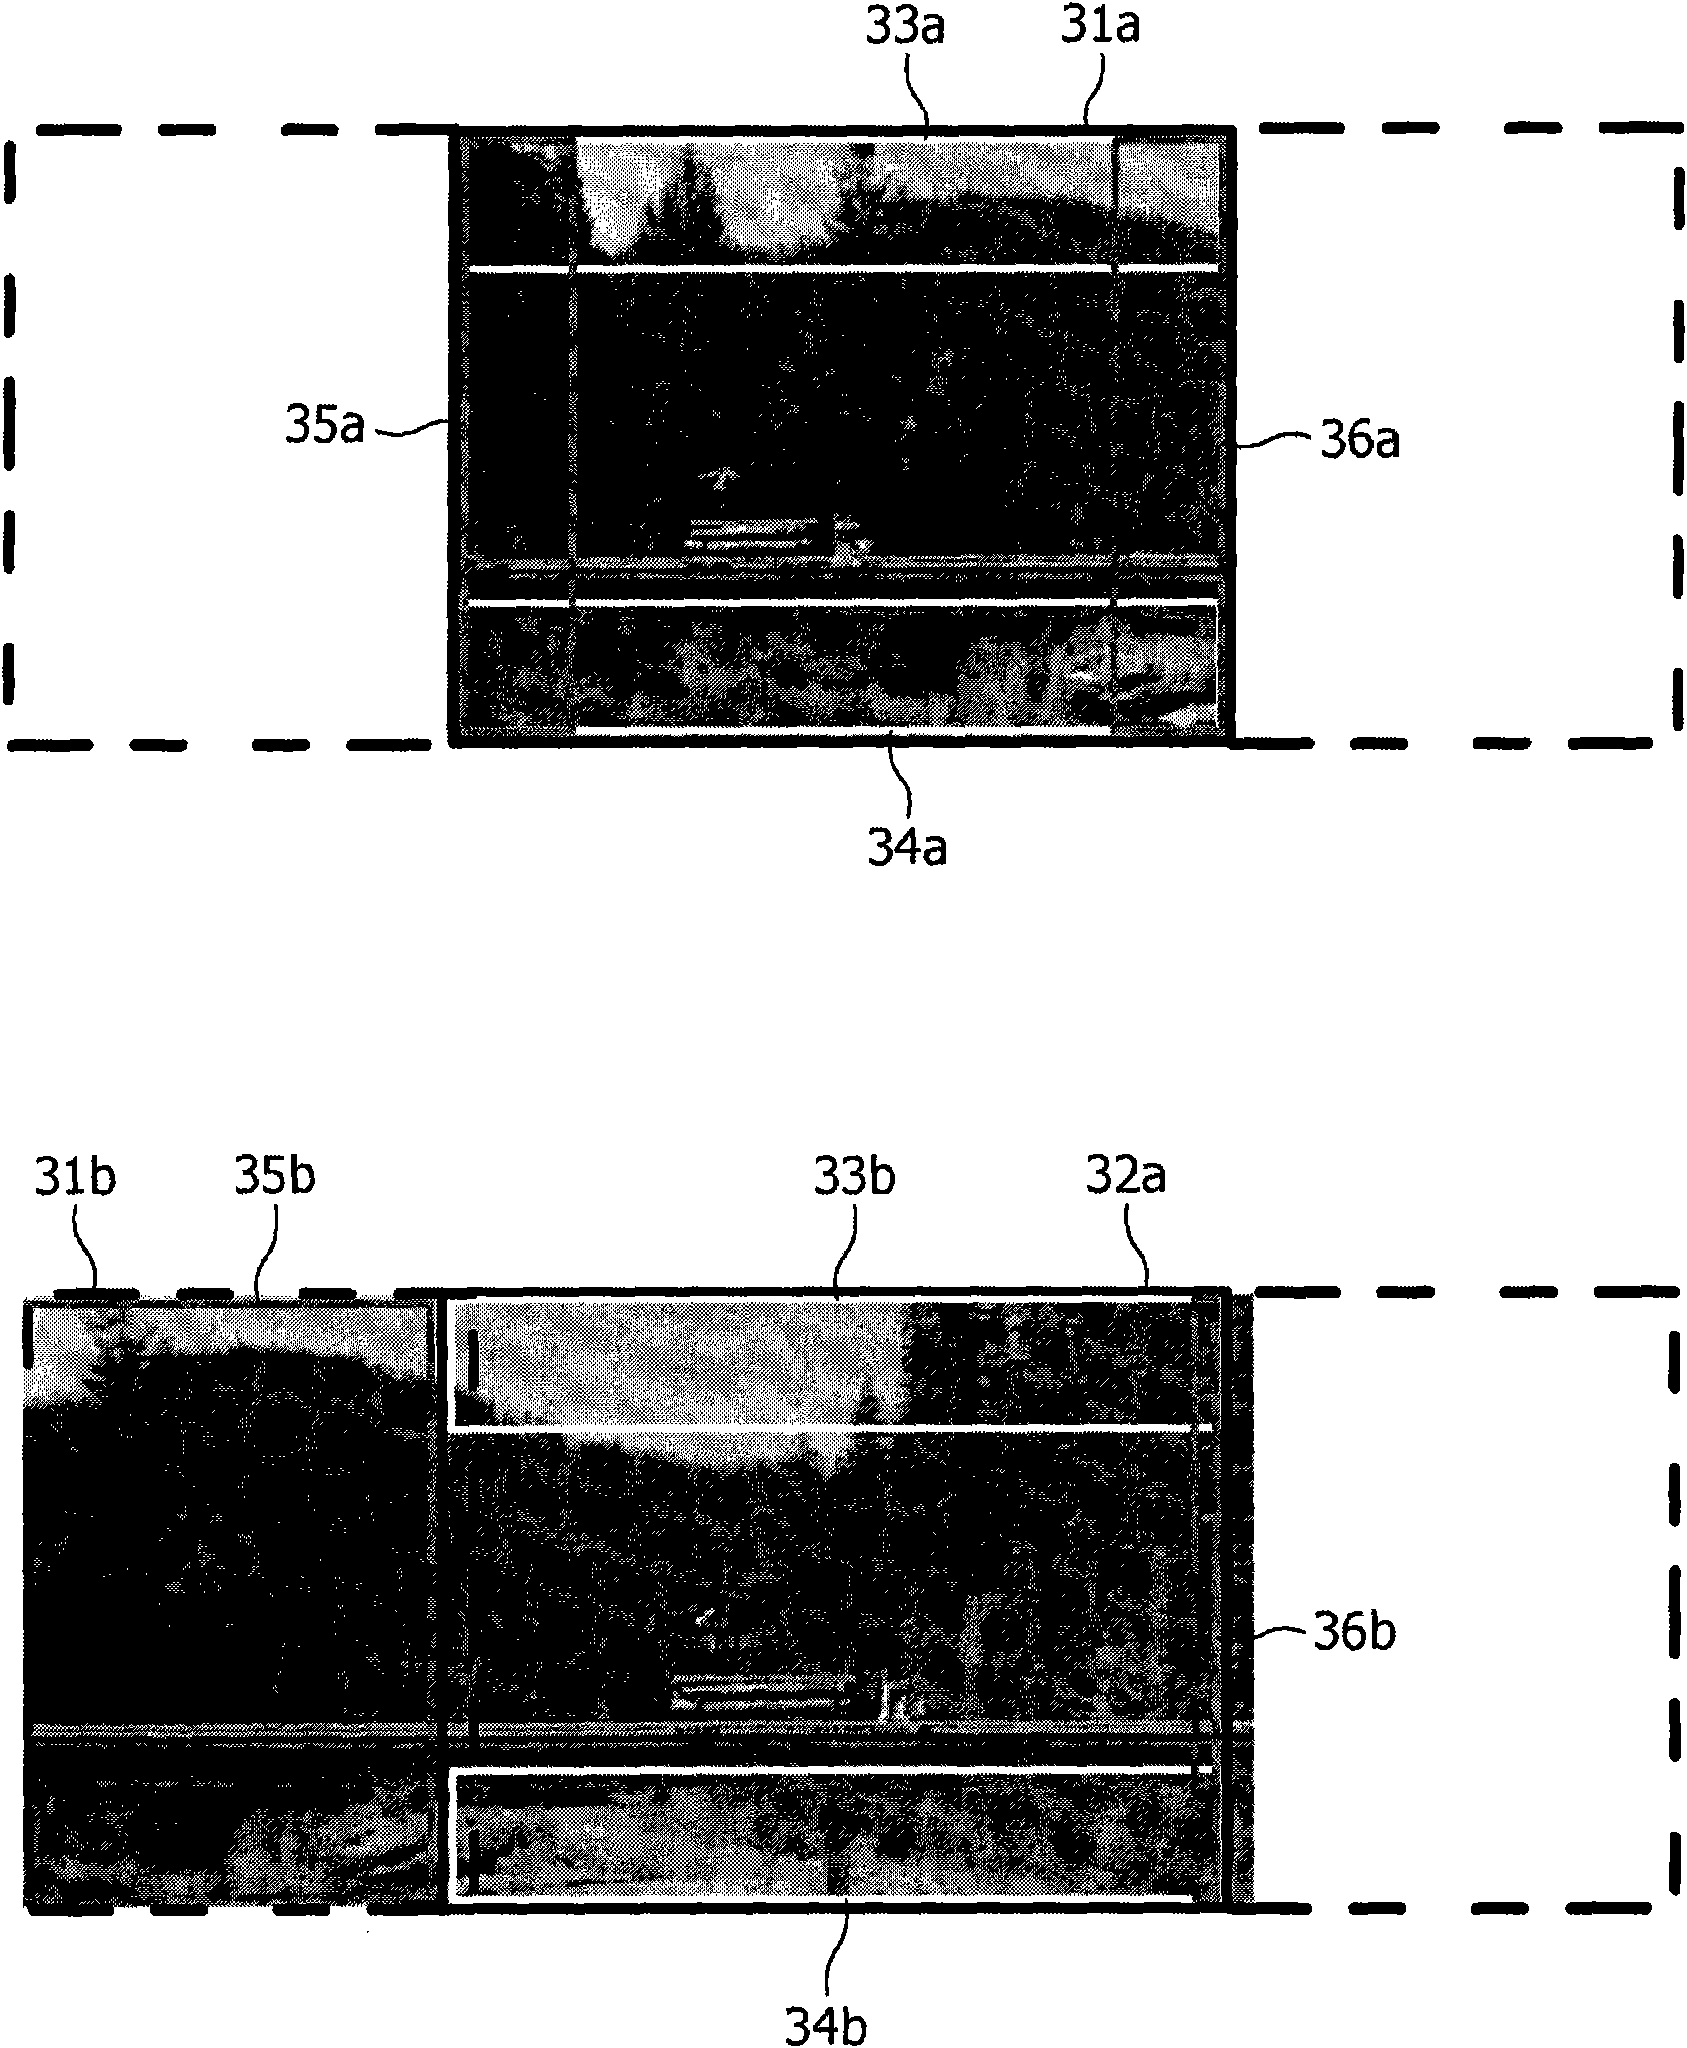 System, method, computer-readable medium, and user interface for displaying light radiation